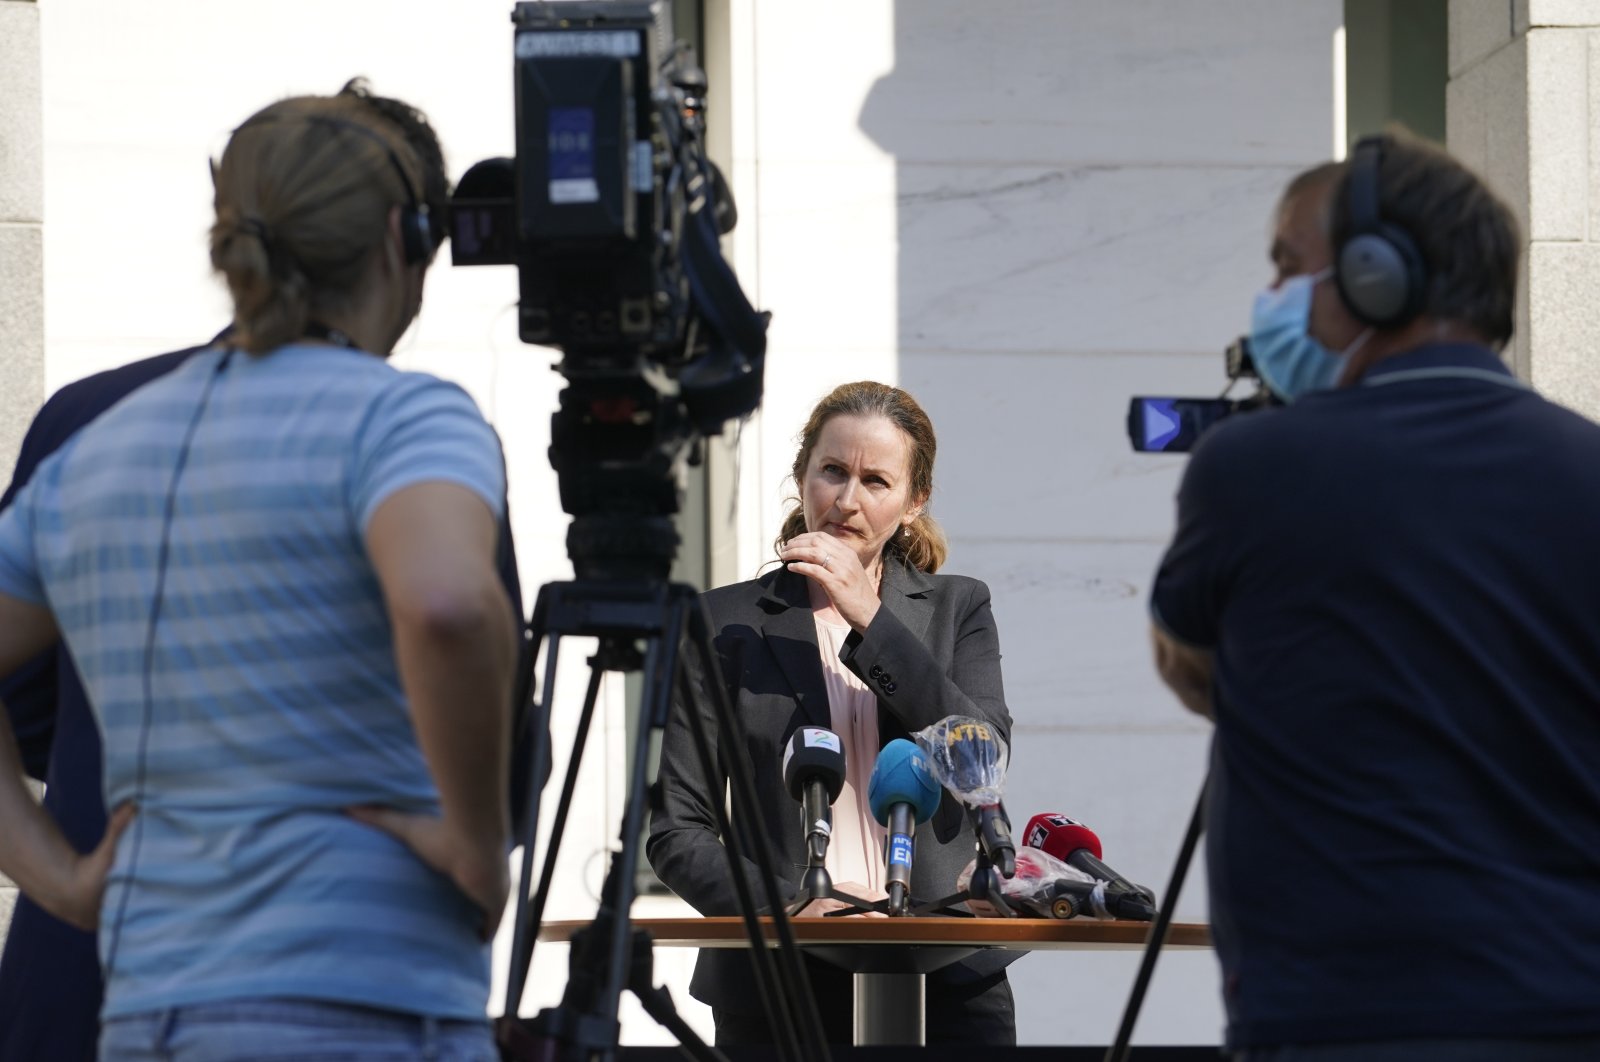 Police attorney Line Nygaard addresses media after a meeting for a man charged with espionage for Russia, in Lillestrom, Norway, Aug. 17, 2020. (EPA Photo)